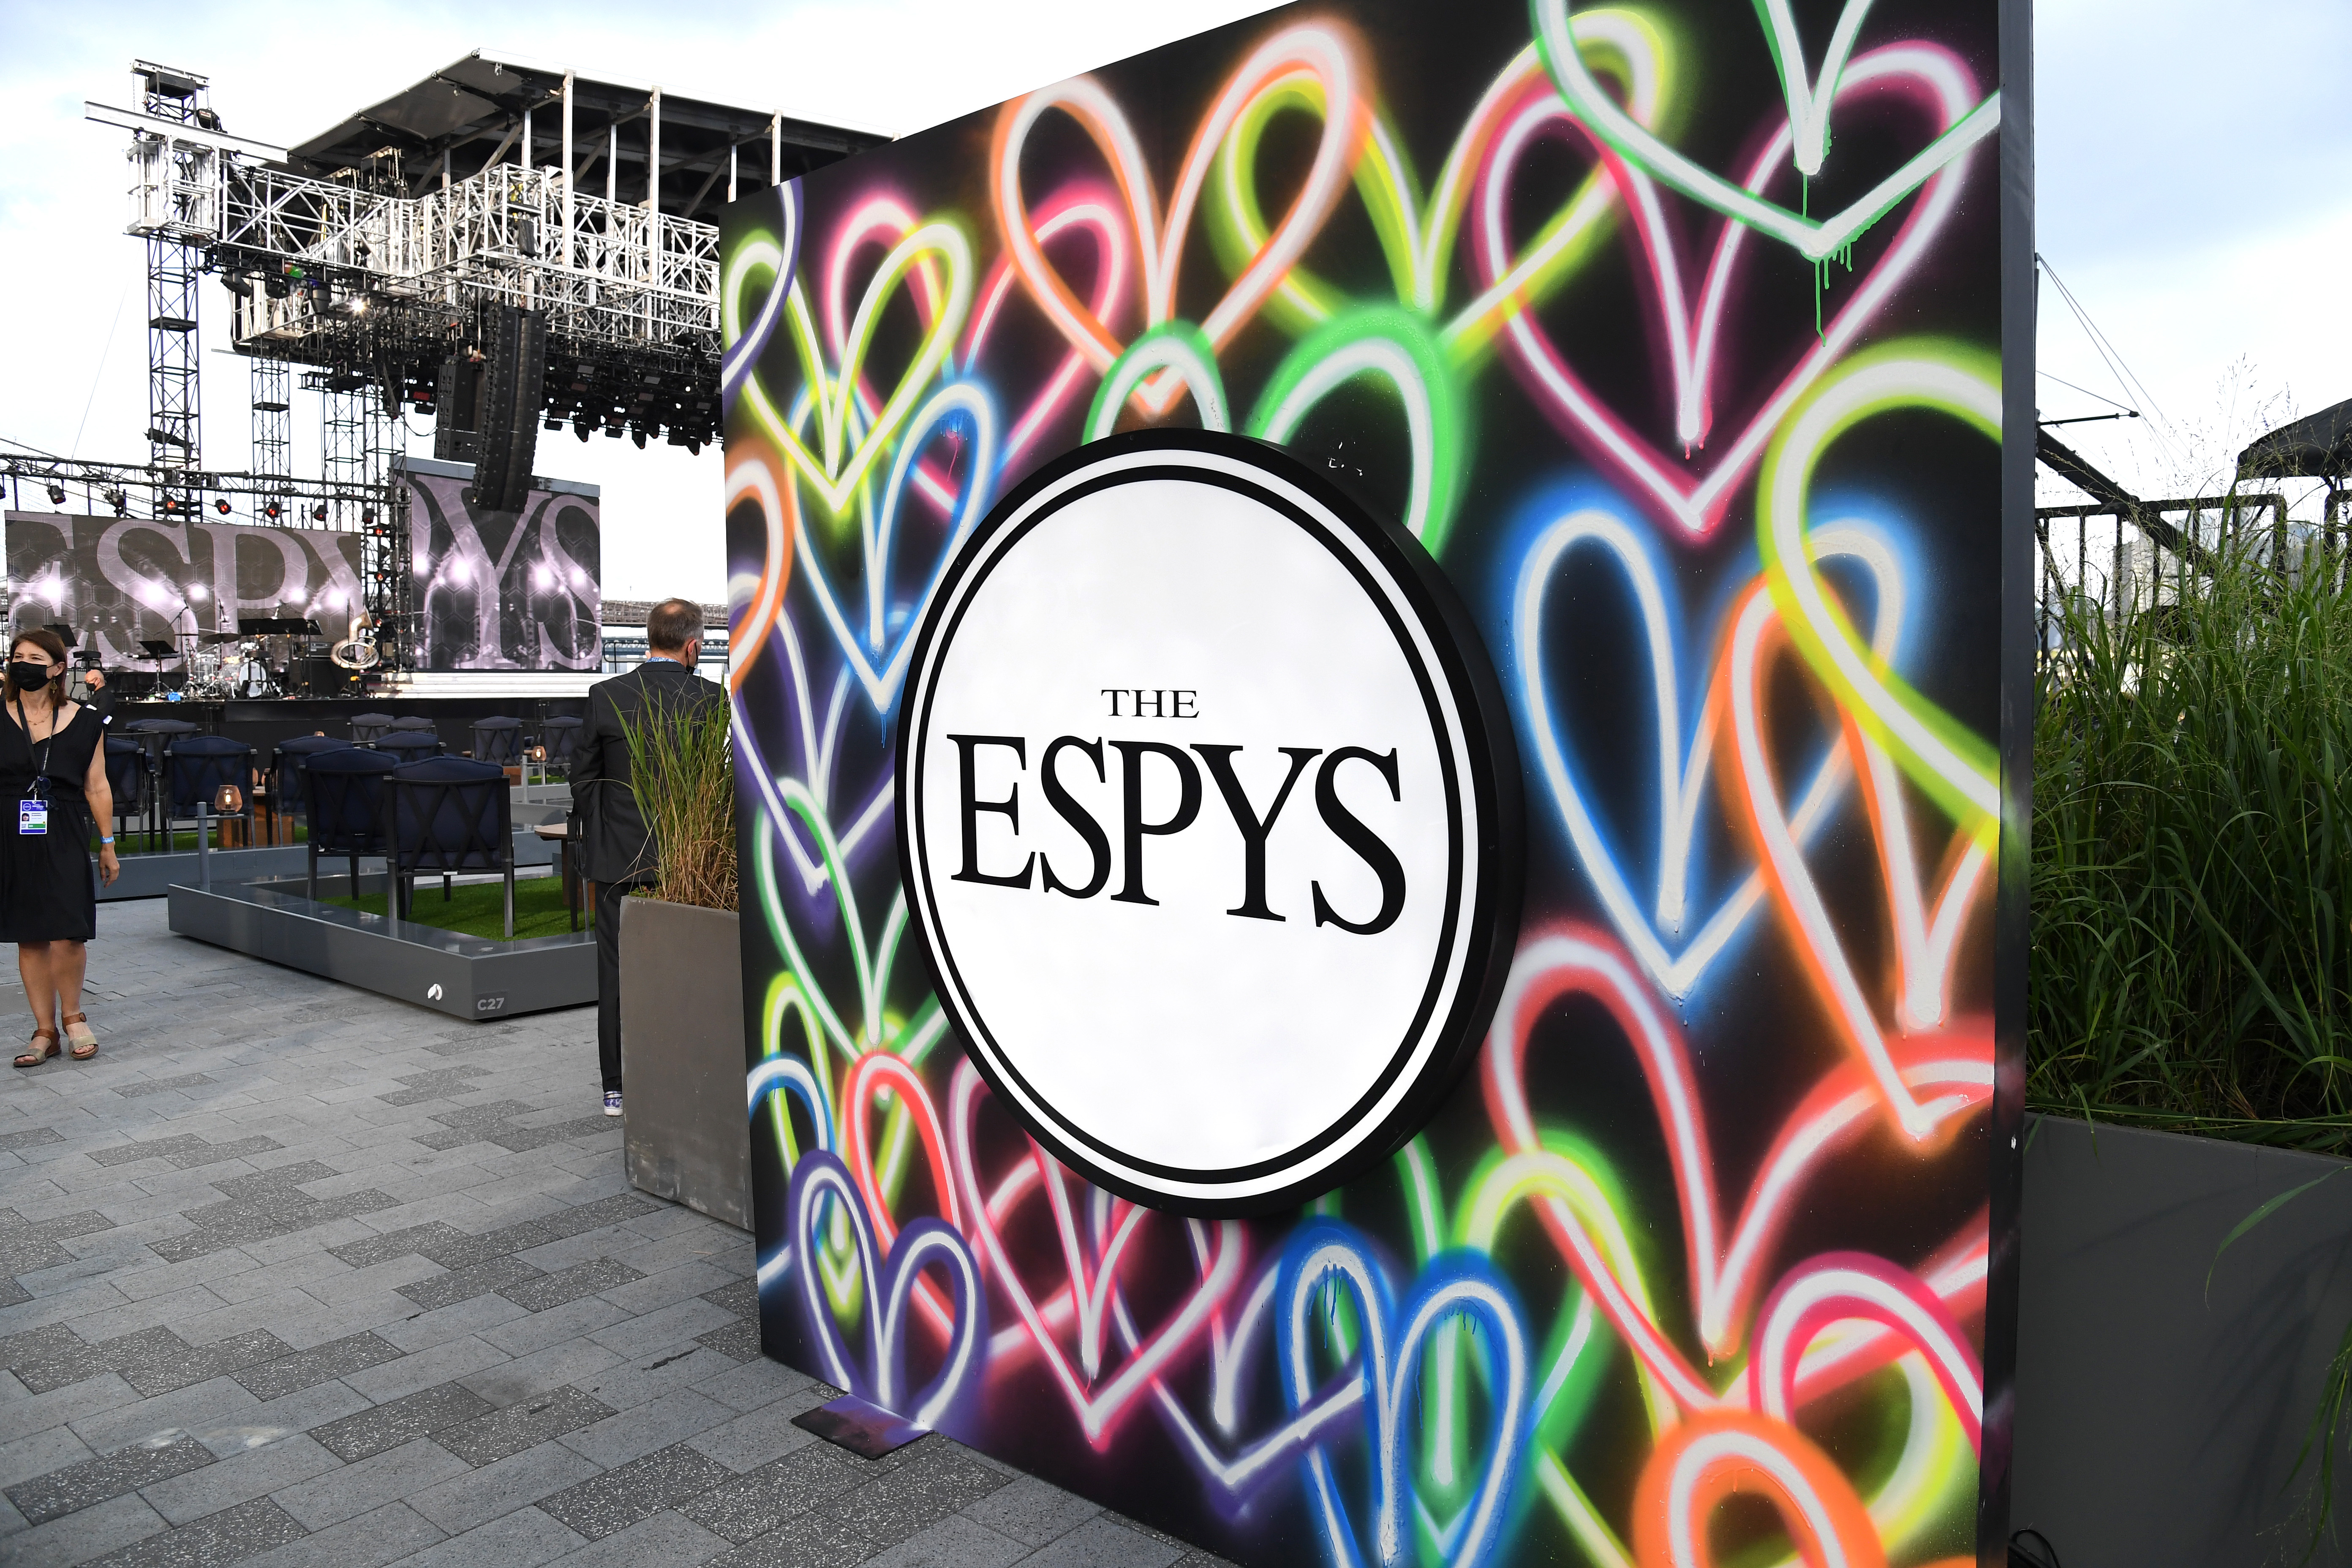 ESPY Awards 2021 free live stream, time, TV channel, schedule, nominees and how to watch online (7/10/21)